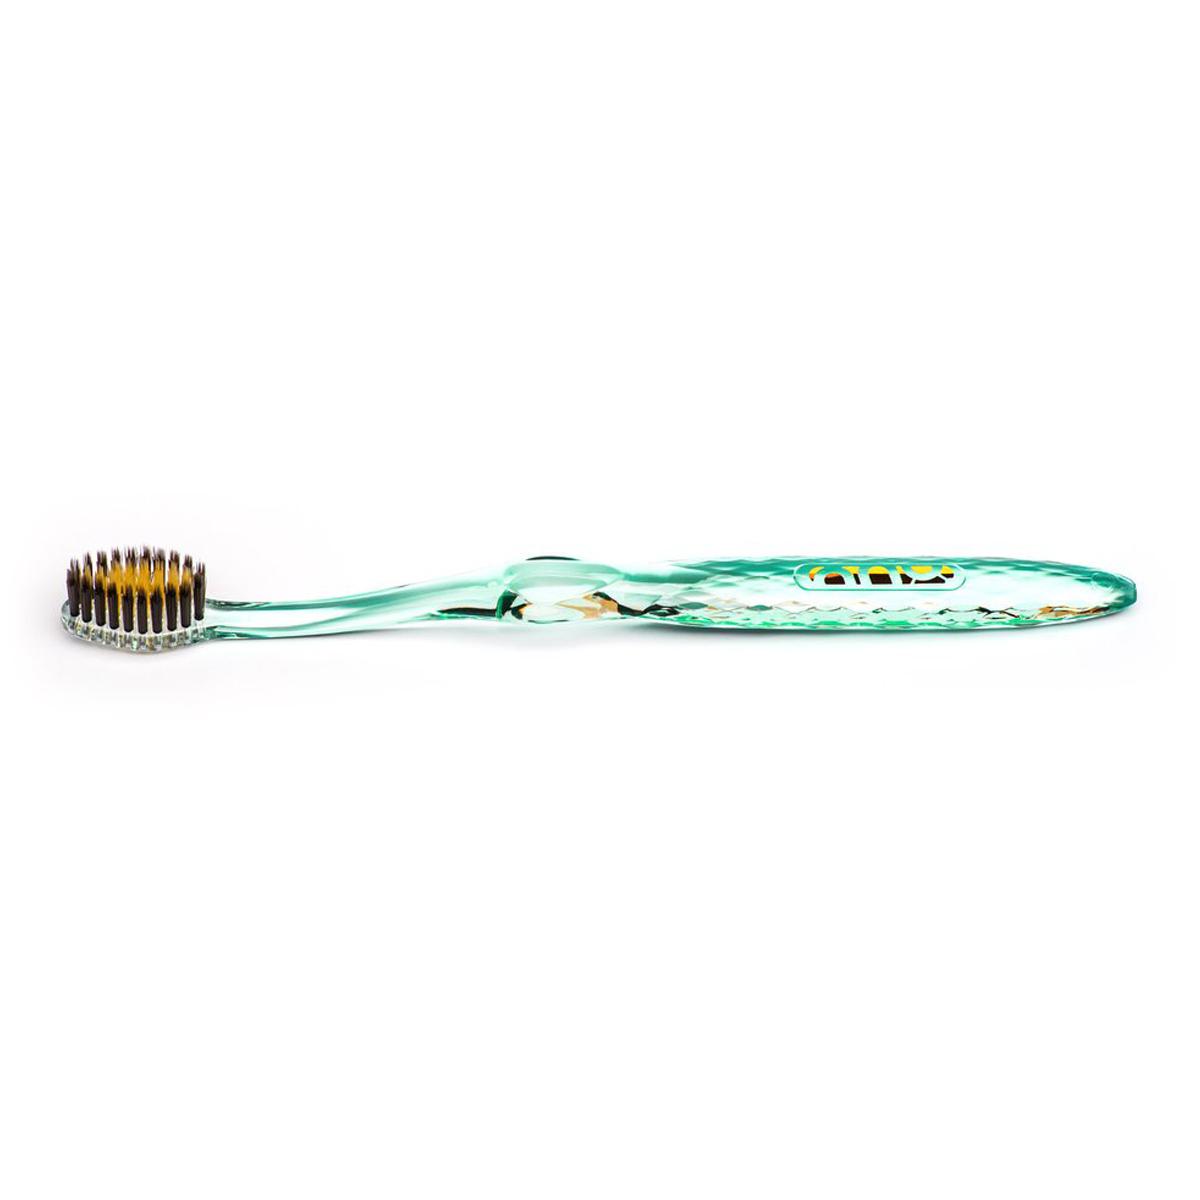 Primary image of Green- Gold + Charcoal Toothbrush